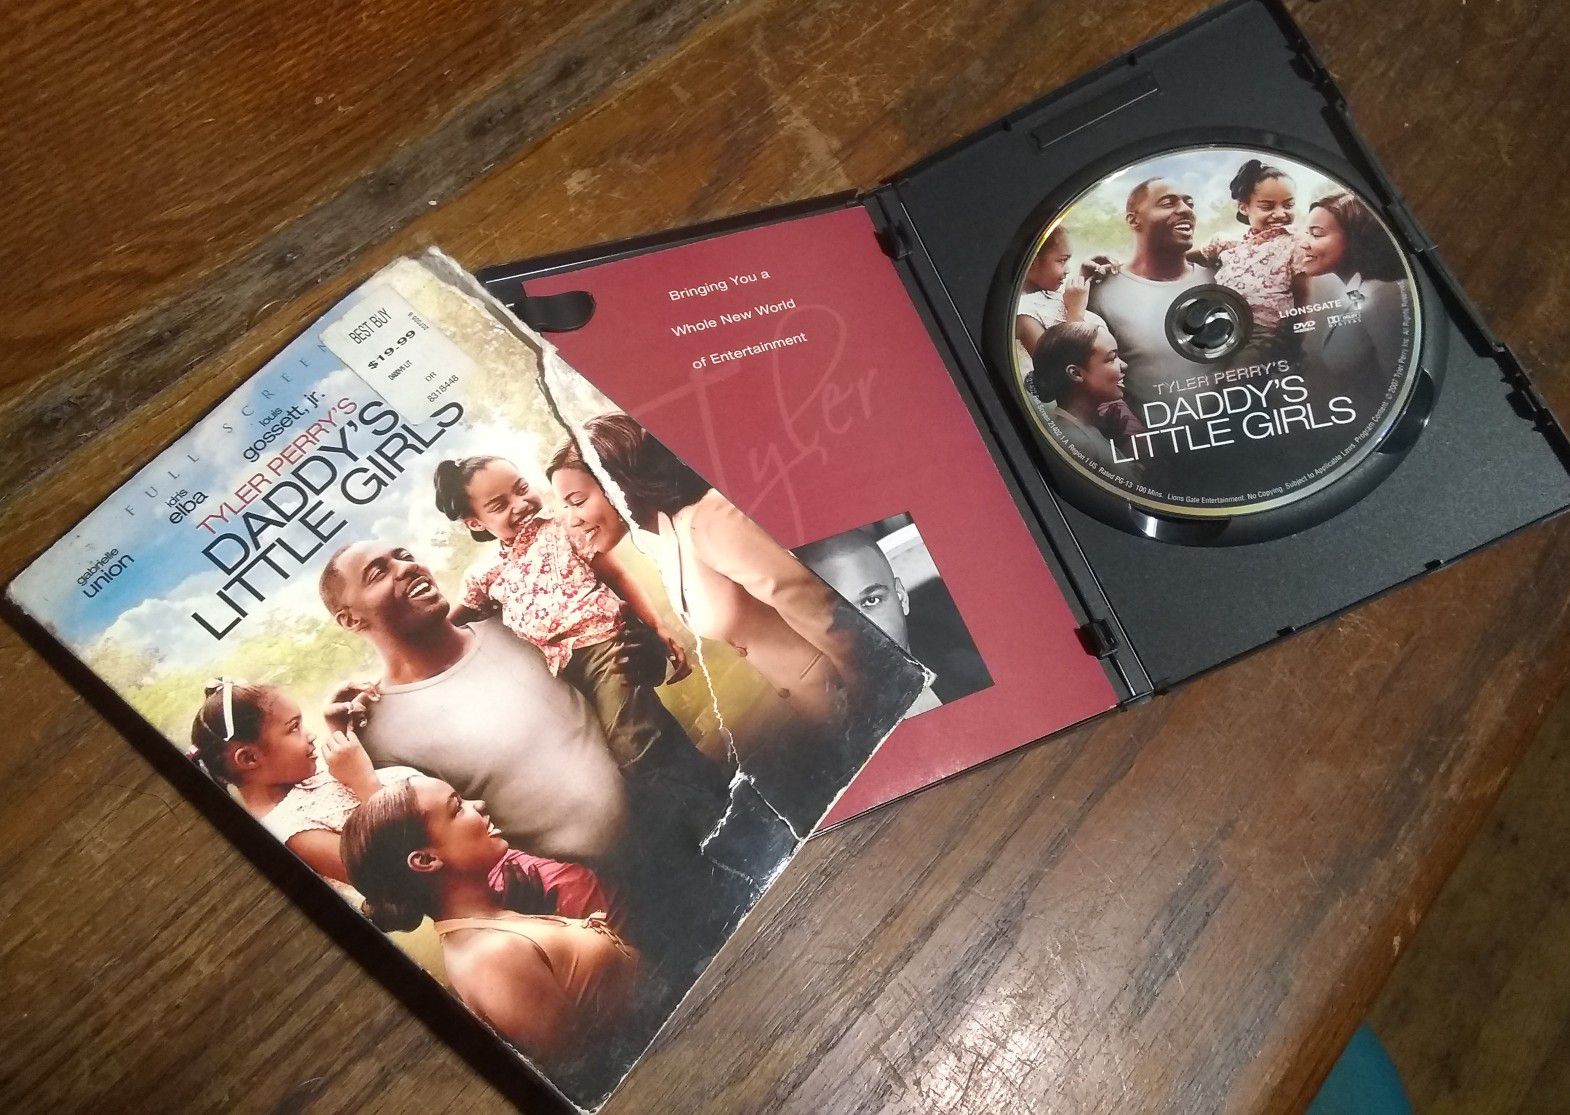 Tyler Perry's 'Daddy's Little Girls' DVD in Original Case and Box